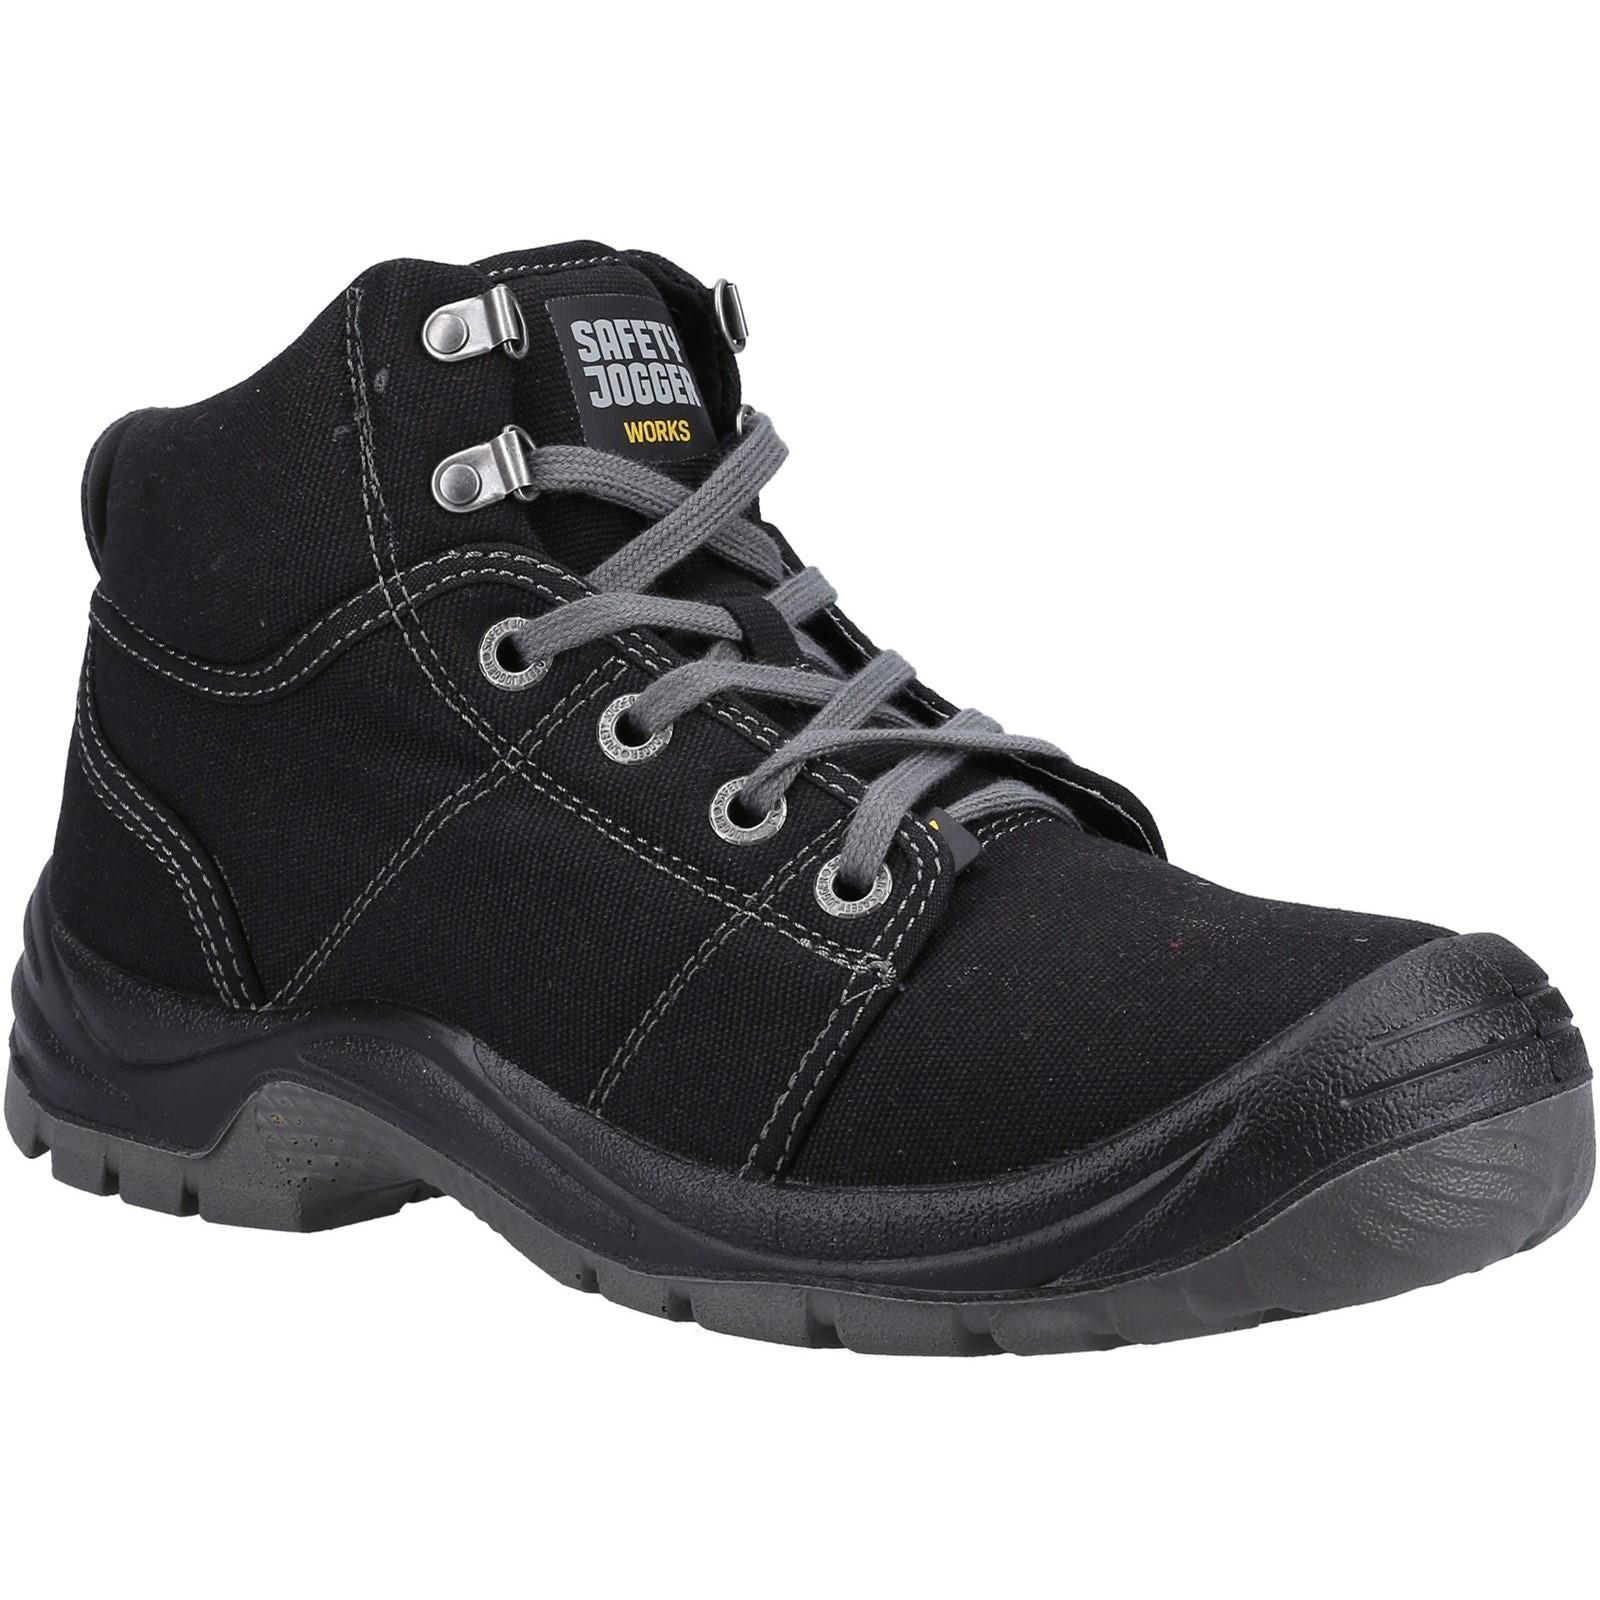 Safety Jogger Desert S1P black steel toe/midsole lace up work safety boots